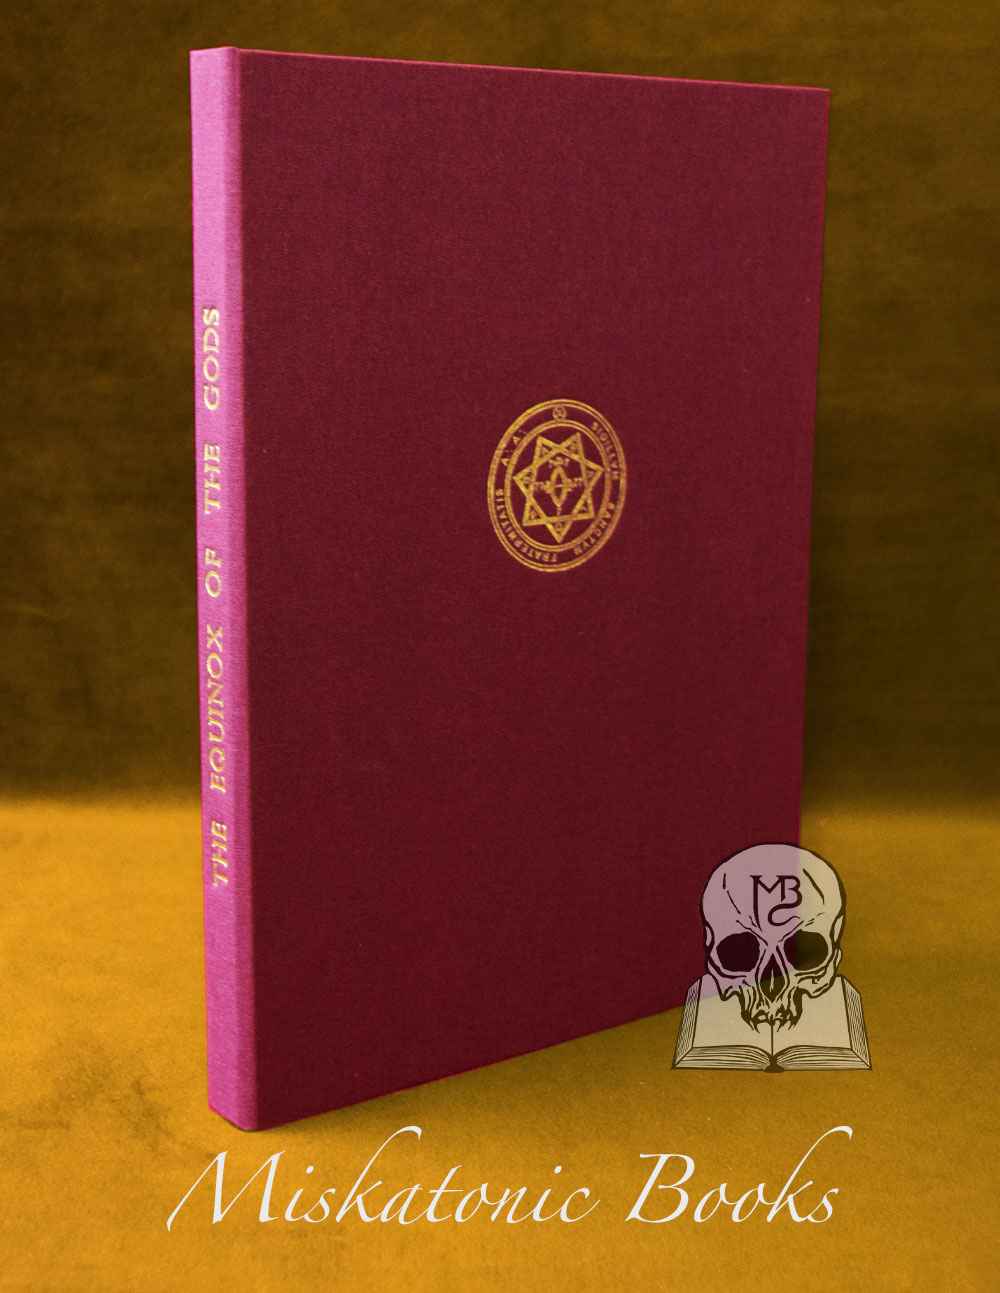 EQUINOX OF THE GODS by Aleister Crowley - Limited Edition Hardcover